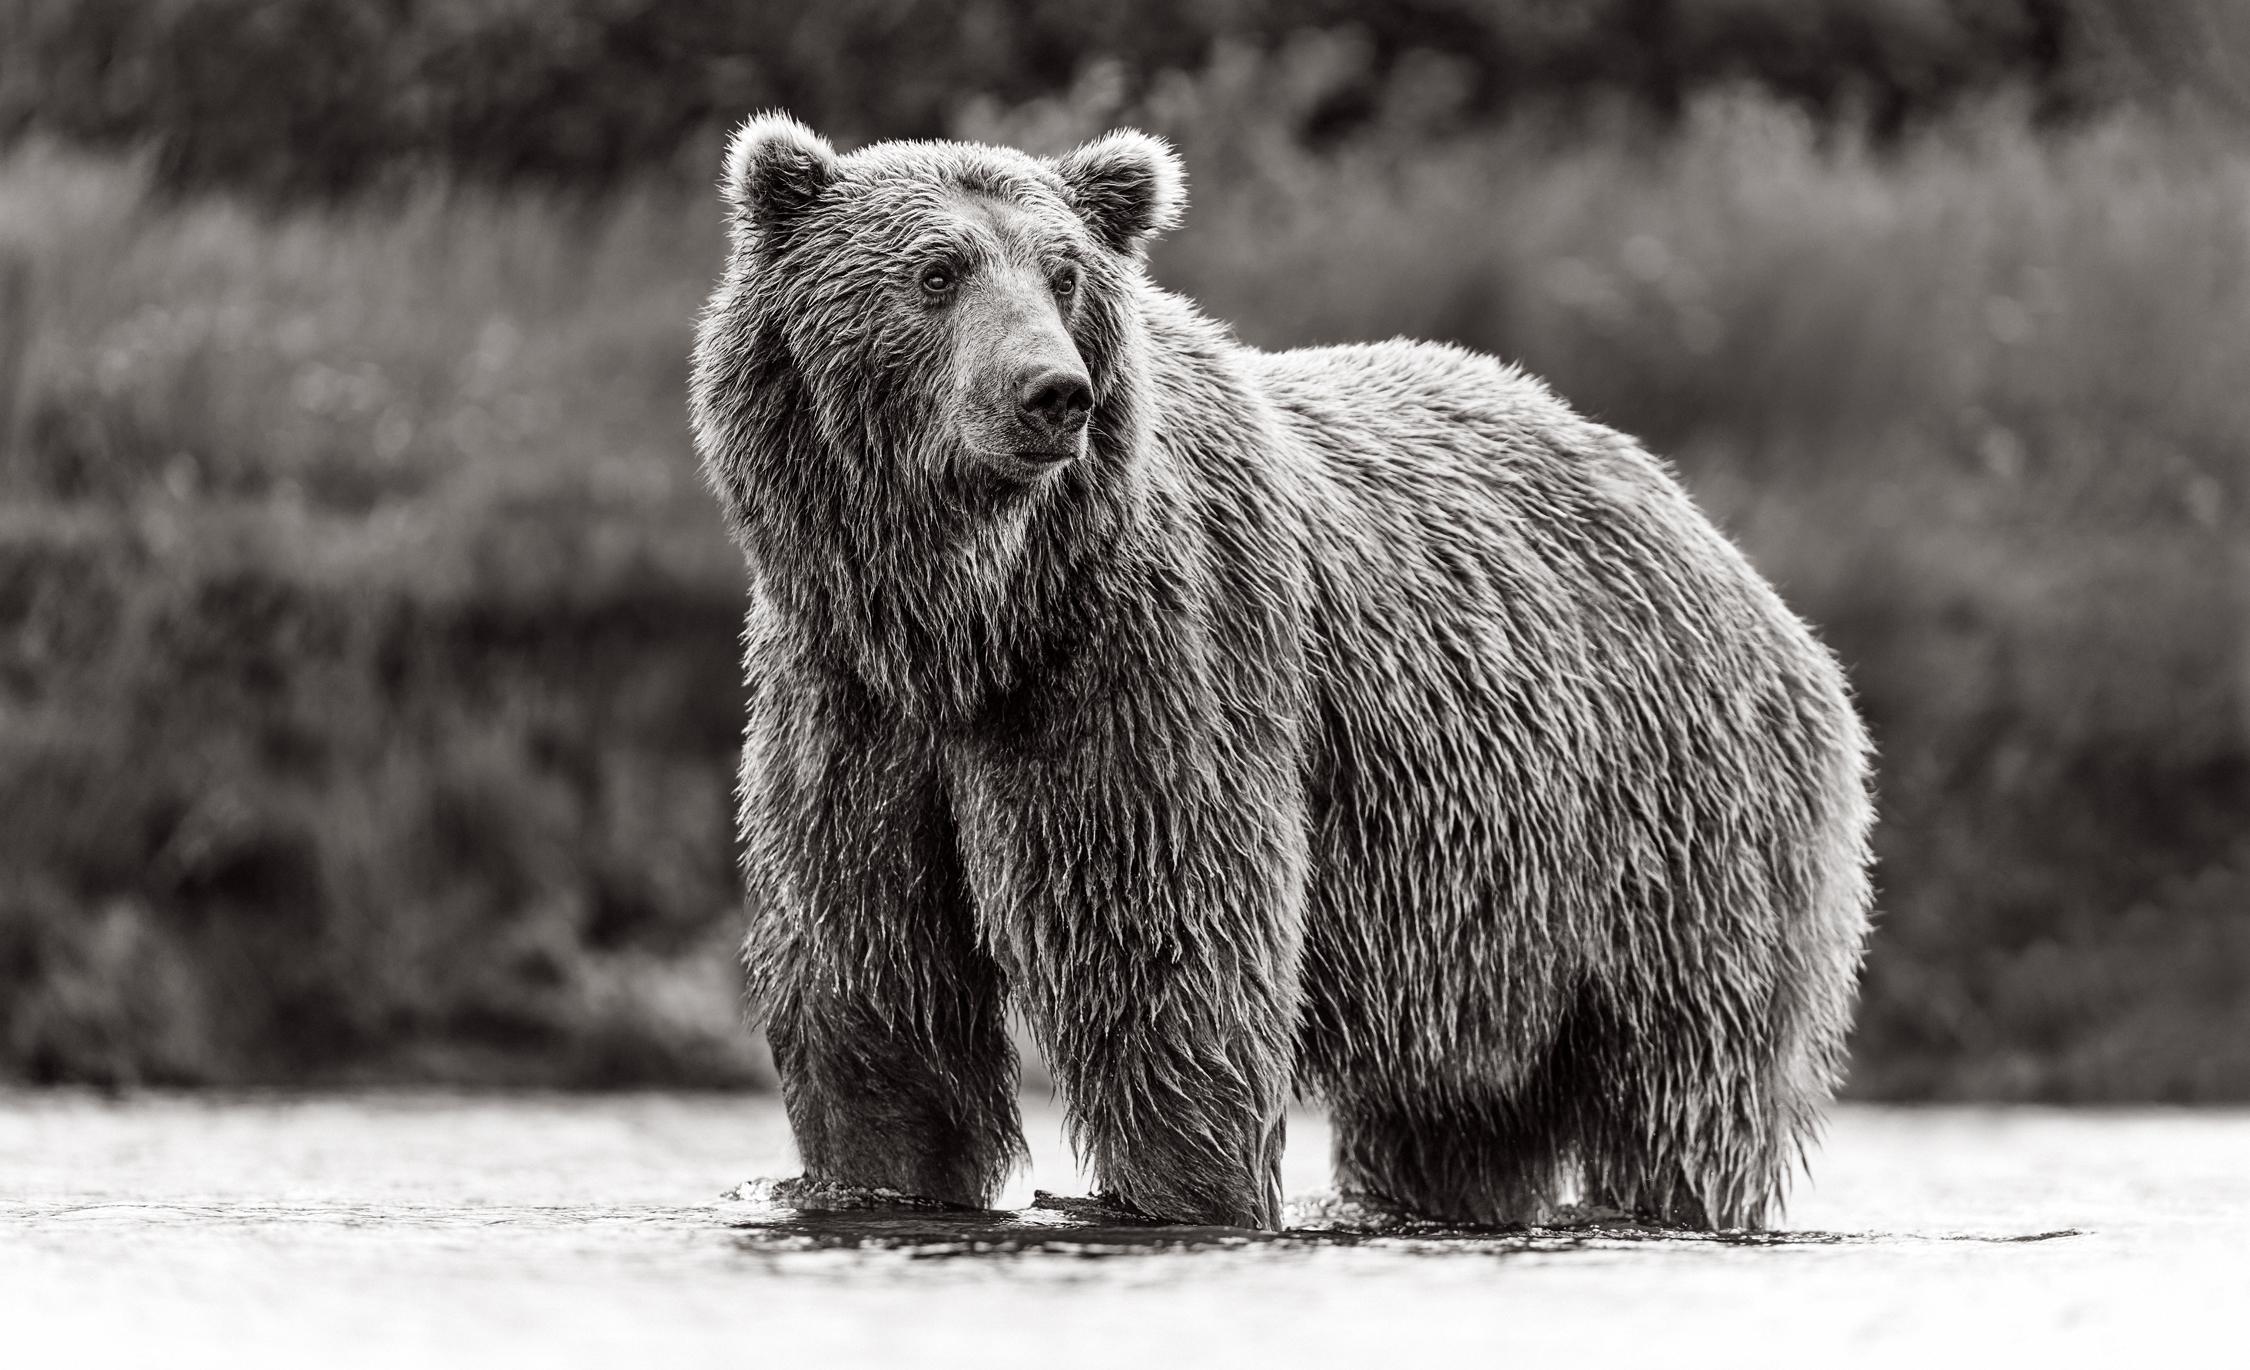 Drew Doggett Black and White Photograph - Brown Bear In Alaska Standing In Creek Looking Off Into Distance